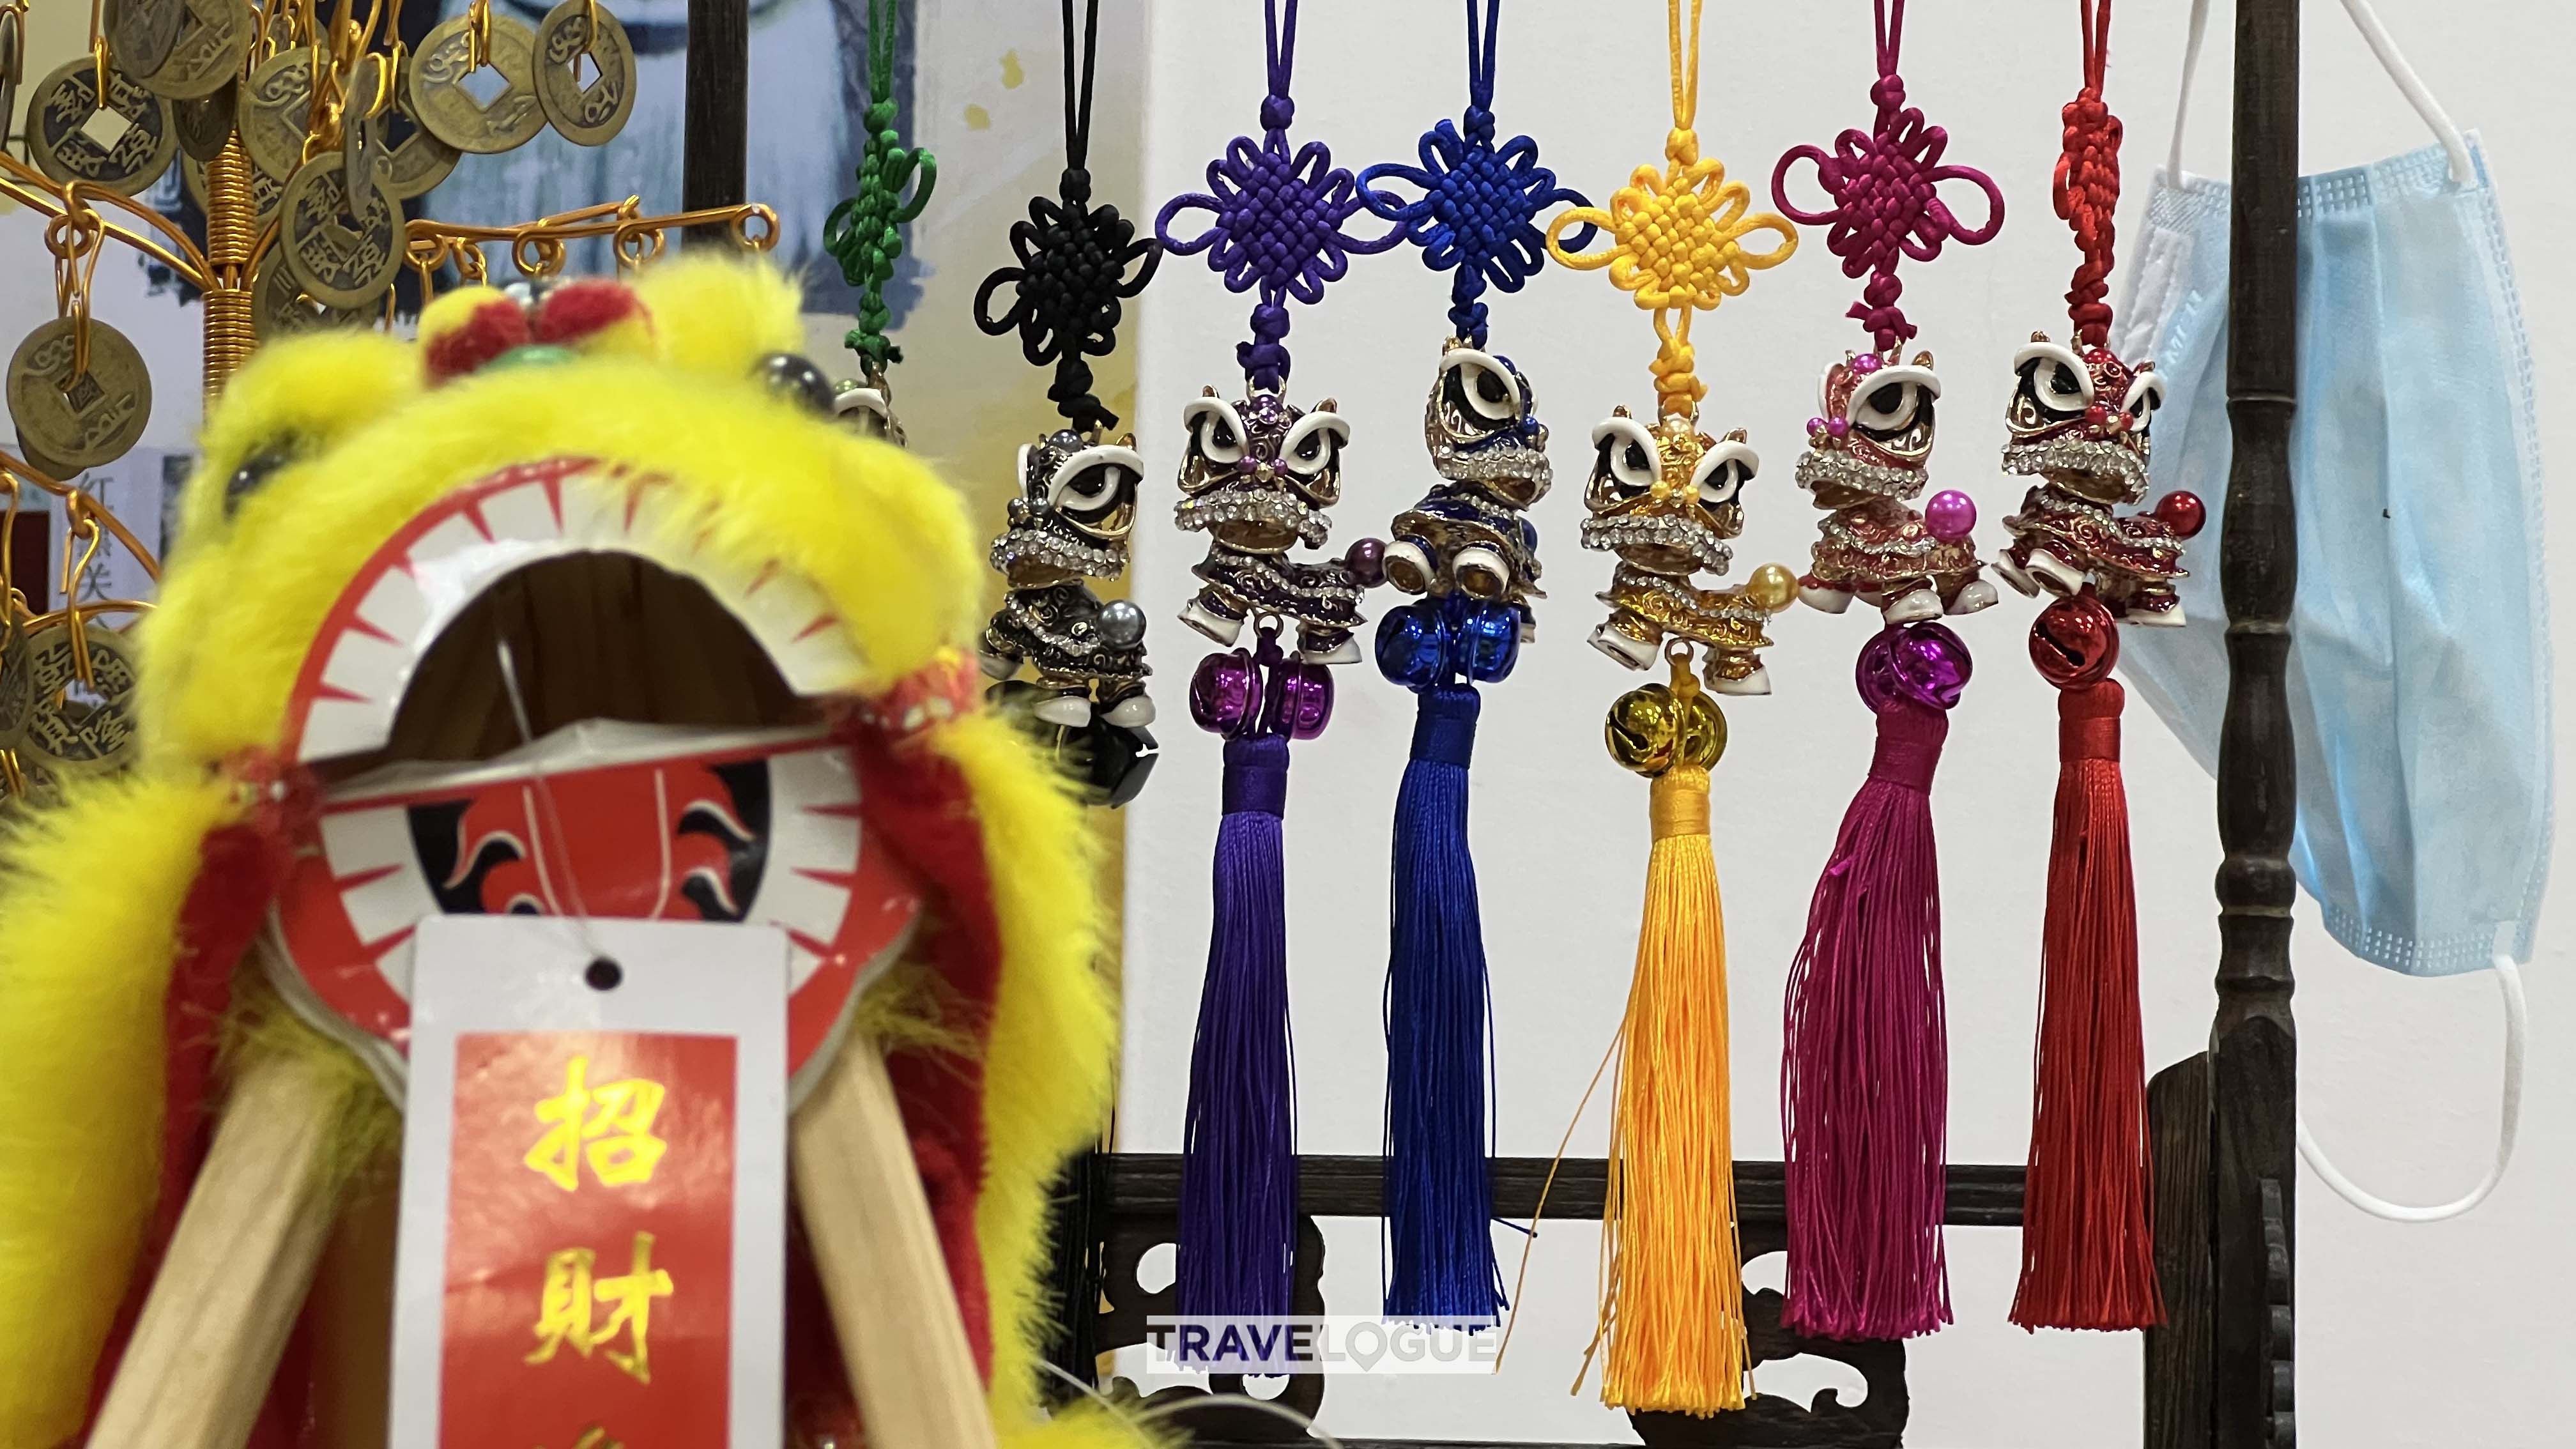 This undated photo shows lion dance heads made by the Li family in Foshan, south China's Guangdong Province. /CGTN